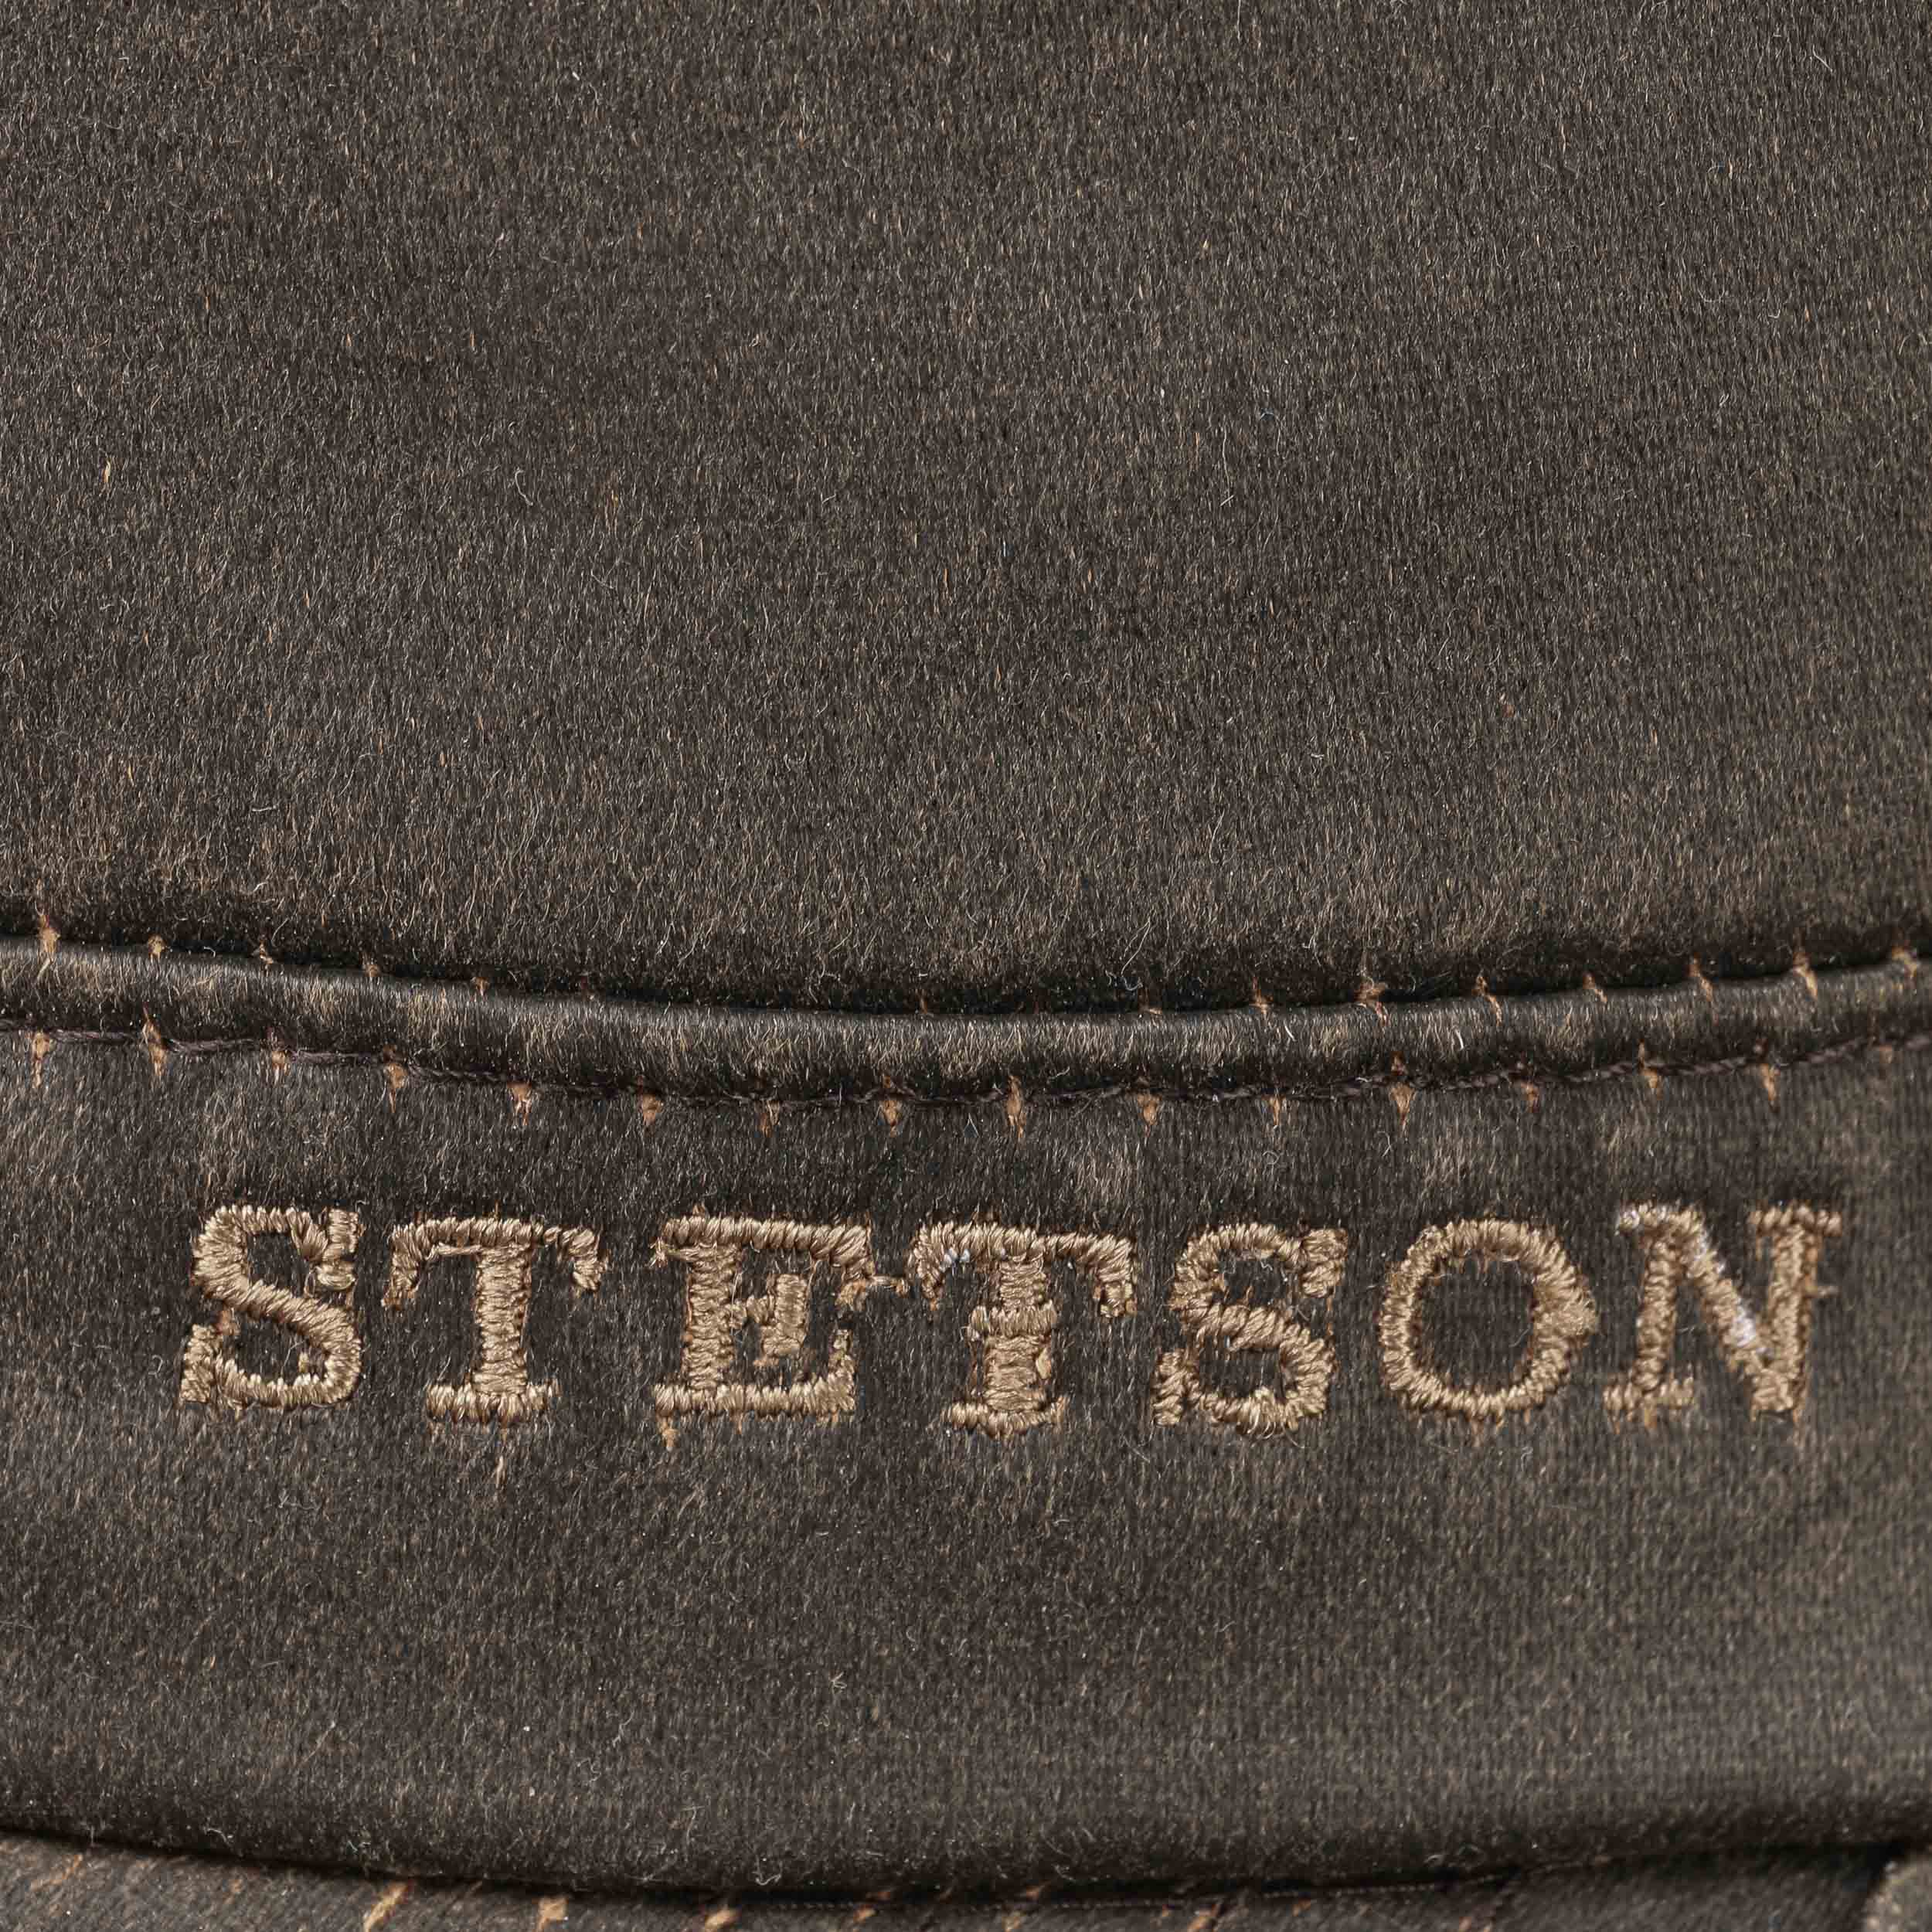 Datto Army Cap by Stetson - 49,00